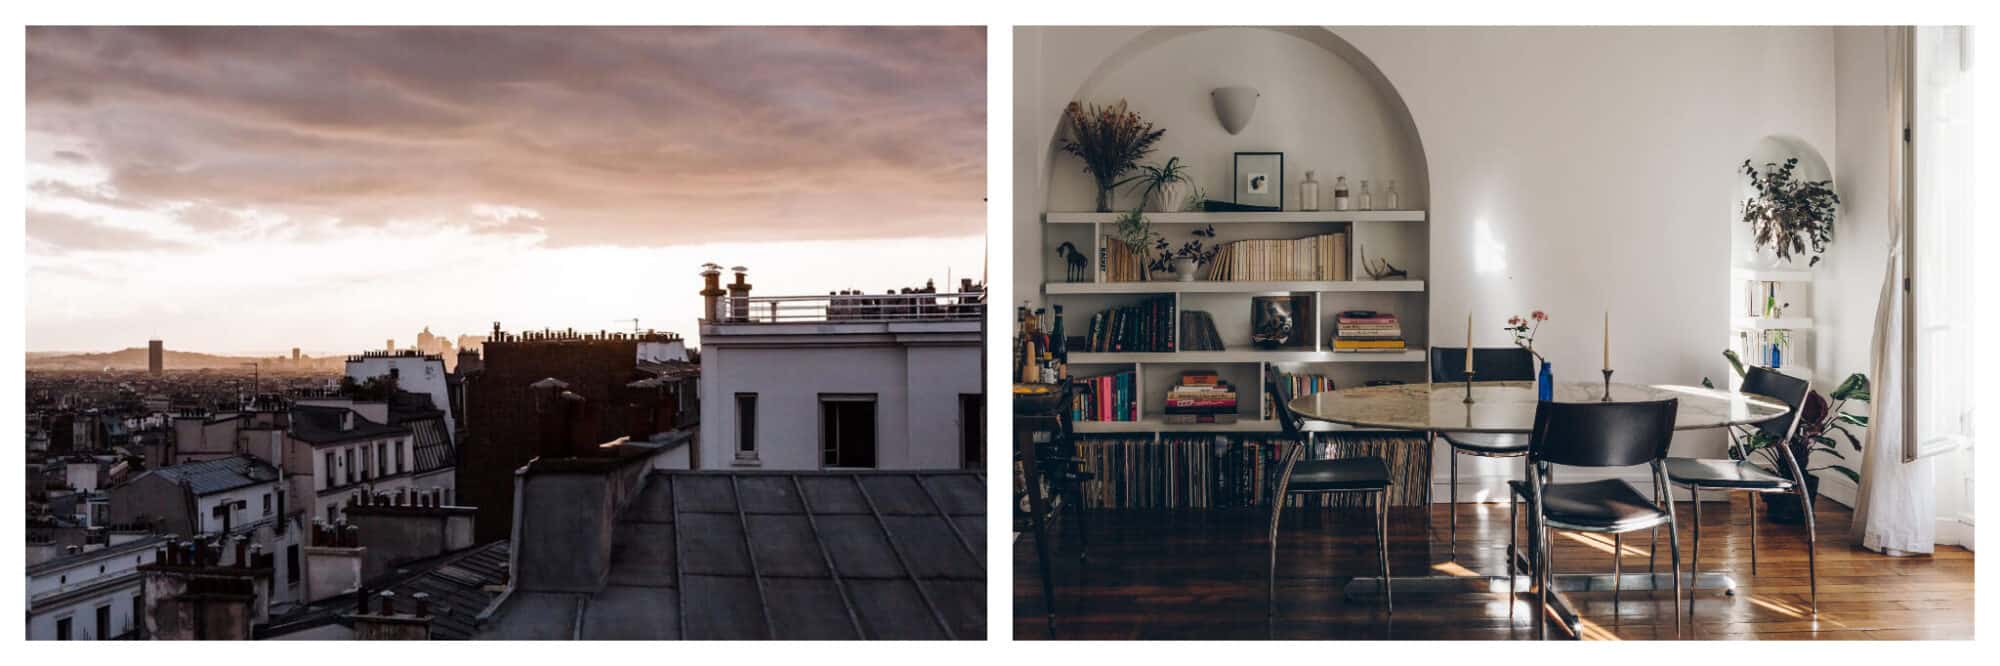 Left: A view of Parisian rooftops in the evening as the sun sets, Right: Light seeps into Kate Devine / Dear Everest's Parisian apartment, onto her table, chairs and bookshelf.